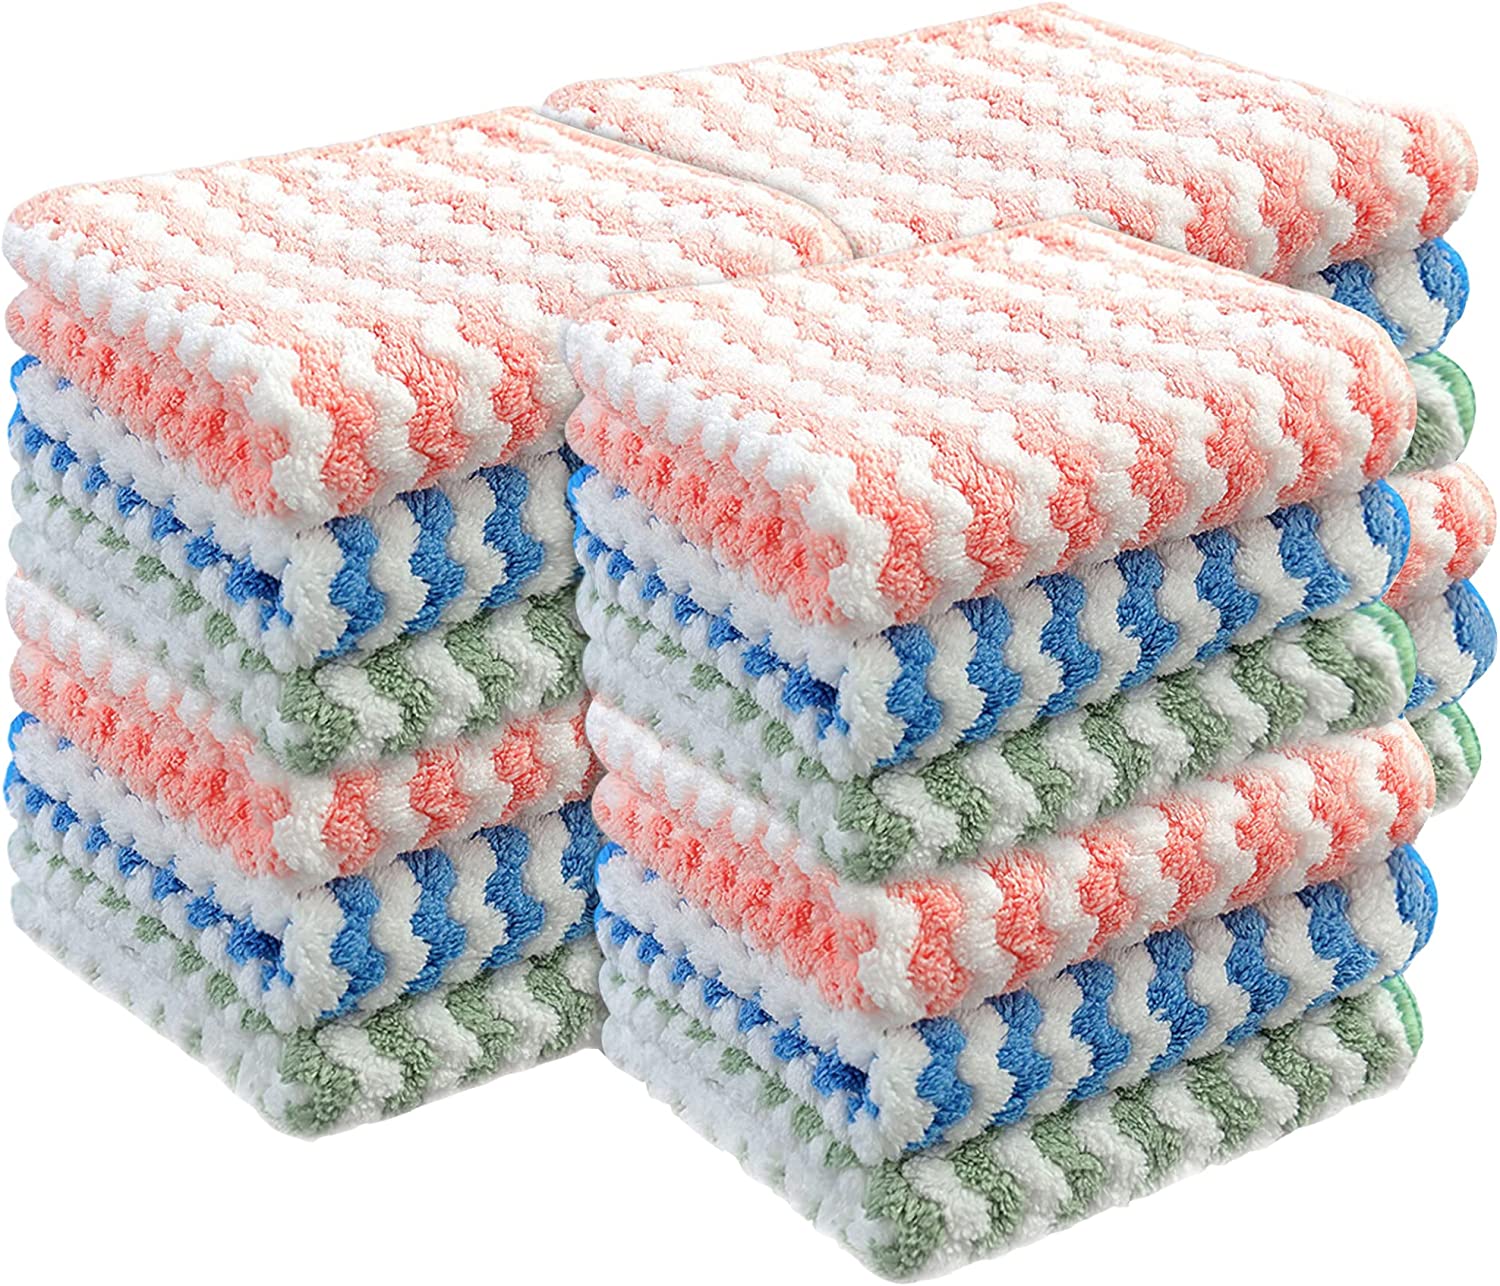 20 Pack Dish Cloths Kitchen Towels Fish Scale Cleaning Rags Lint Free  Streak Washcloths Microfiber Reusable Hand Towel Absorbent Dishtowels